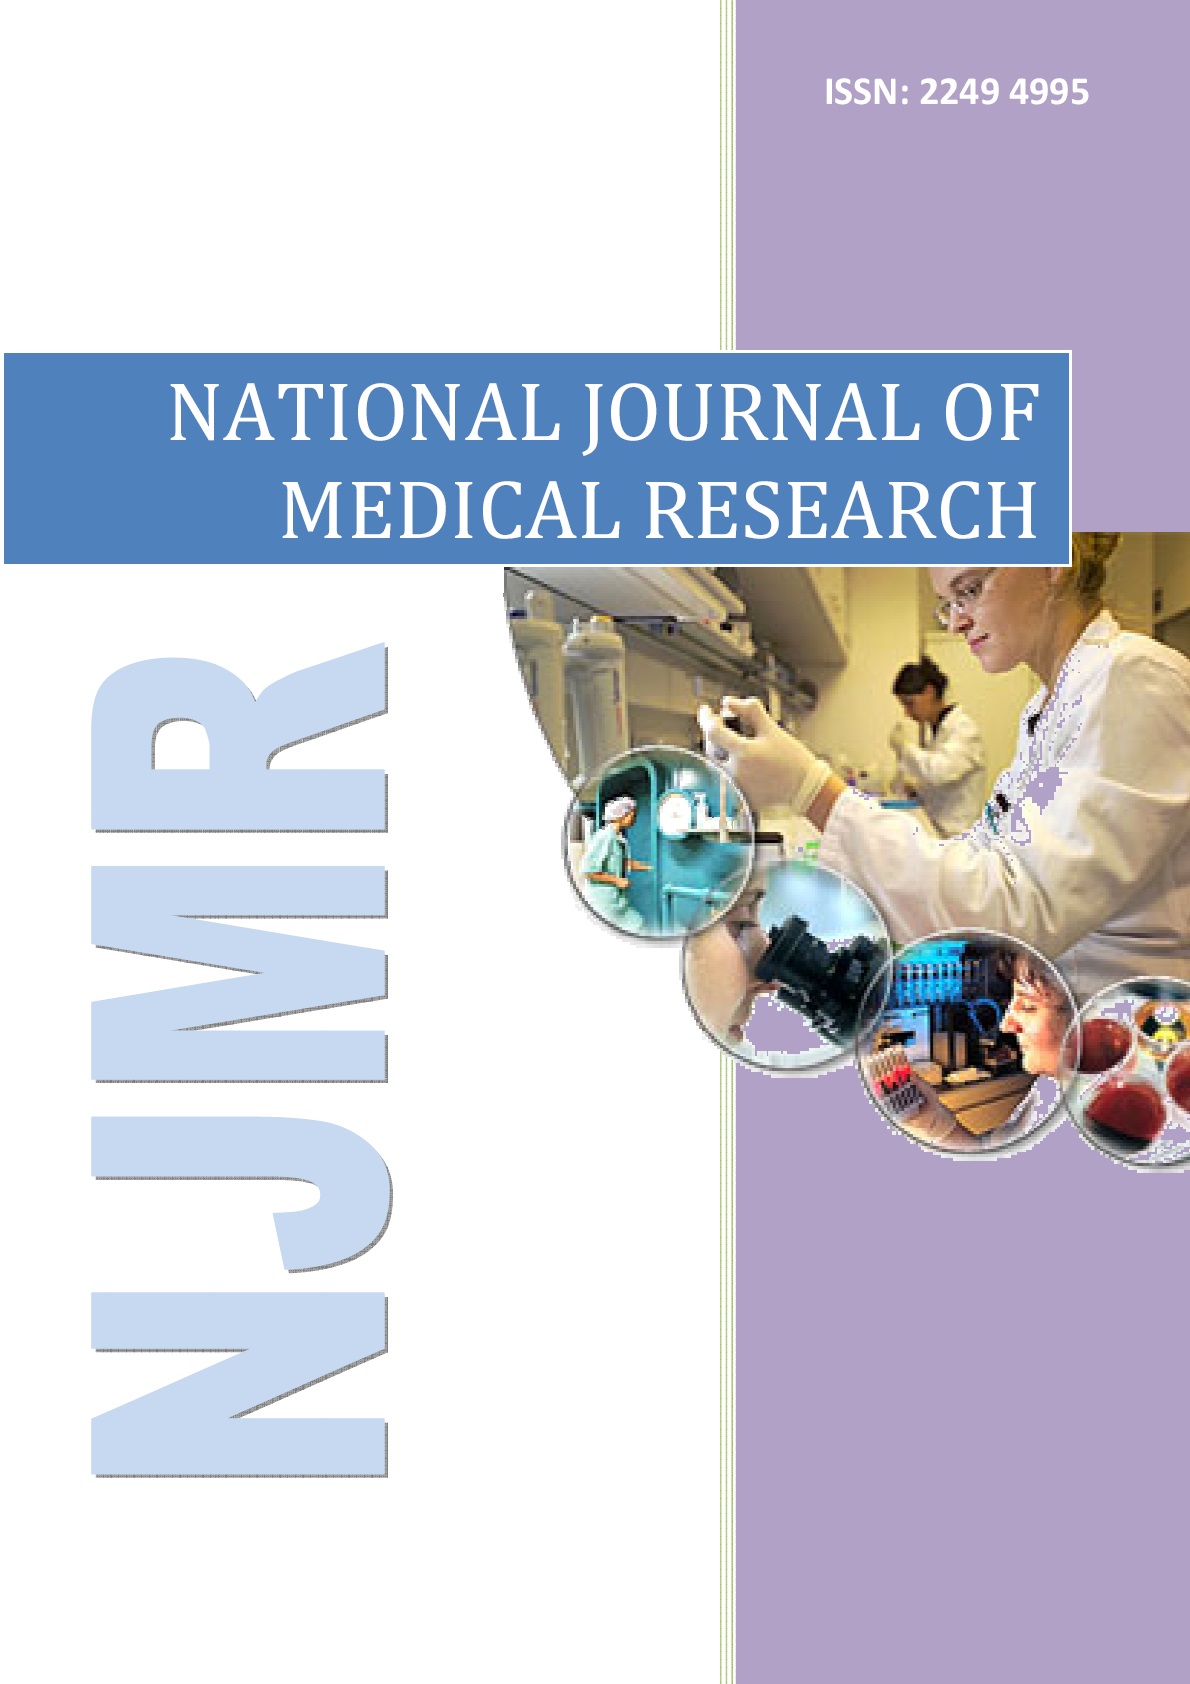 articles of medical research